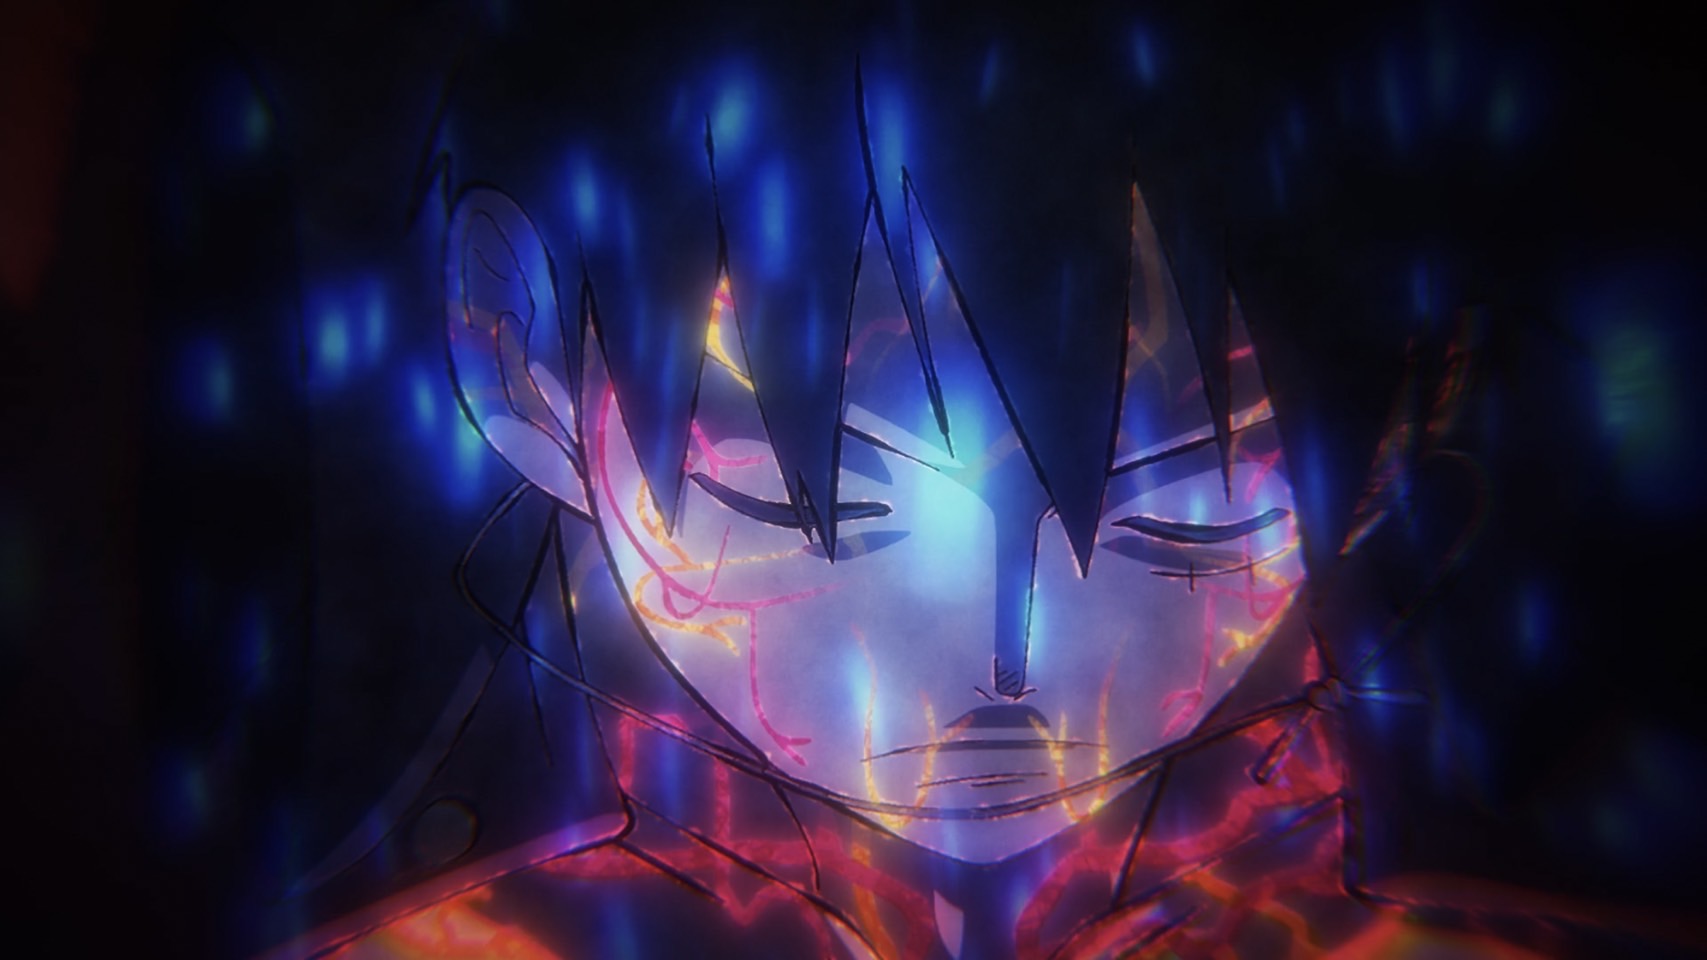 One Piece Episode 1015 - Straw Hat Luffy - The Man Who Will Become